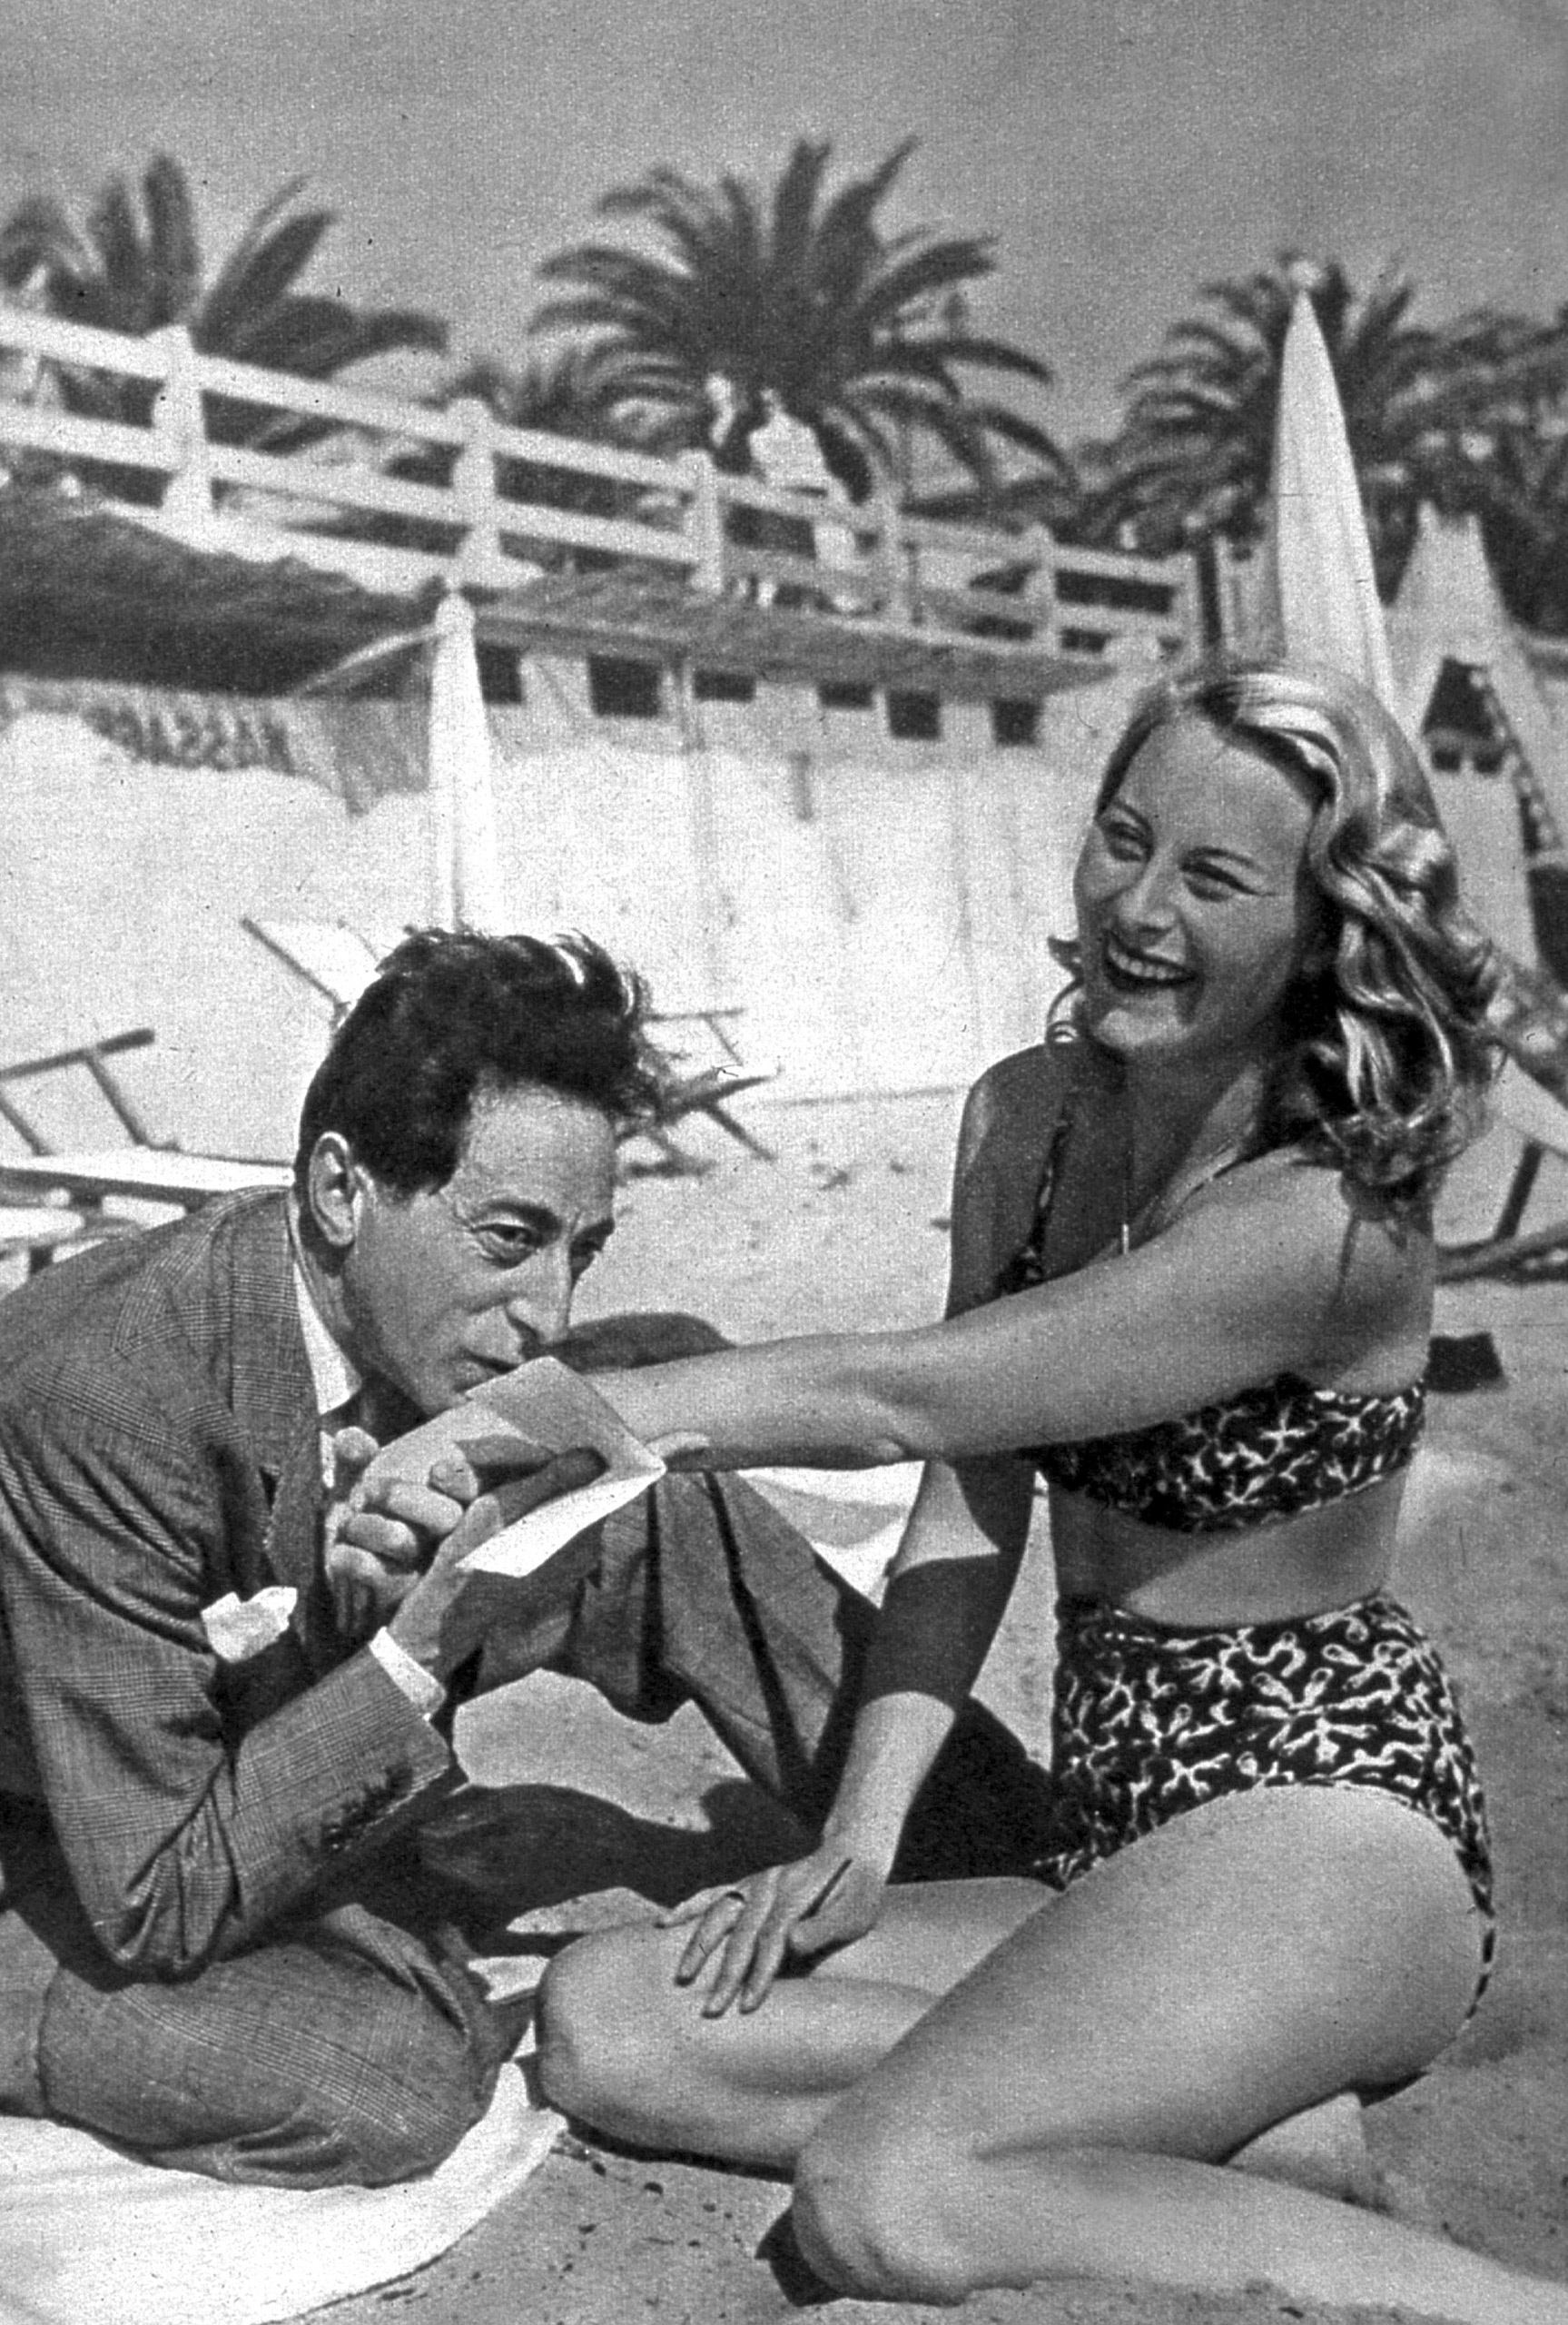 French actress Michele Morgan with artist and filmmaker Jean Cocteau on the beach during the Cannes Film Festival, 1946.